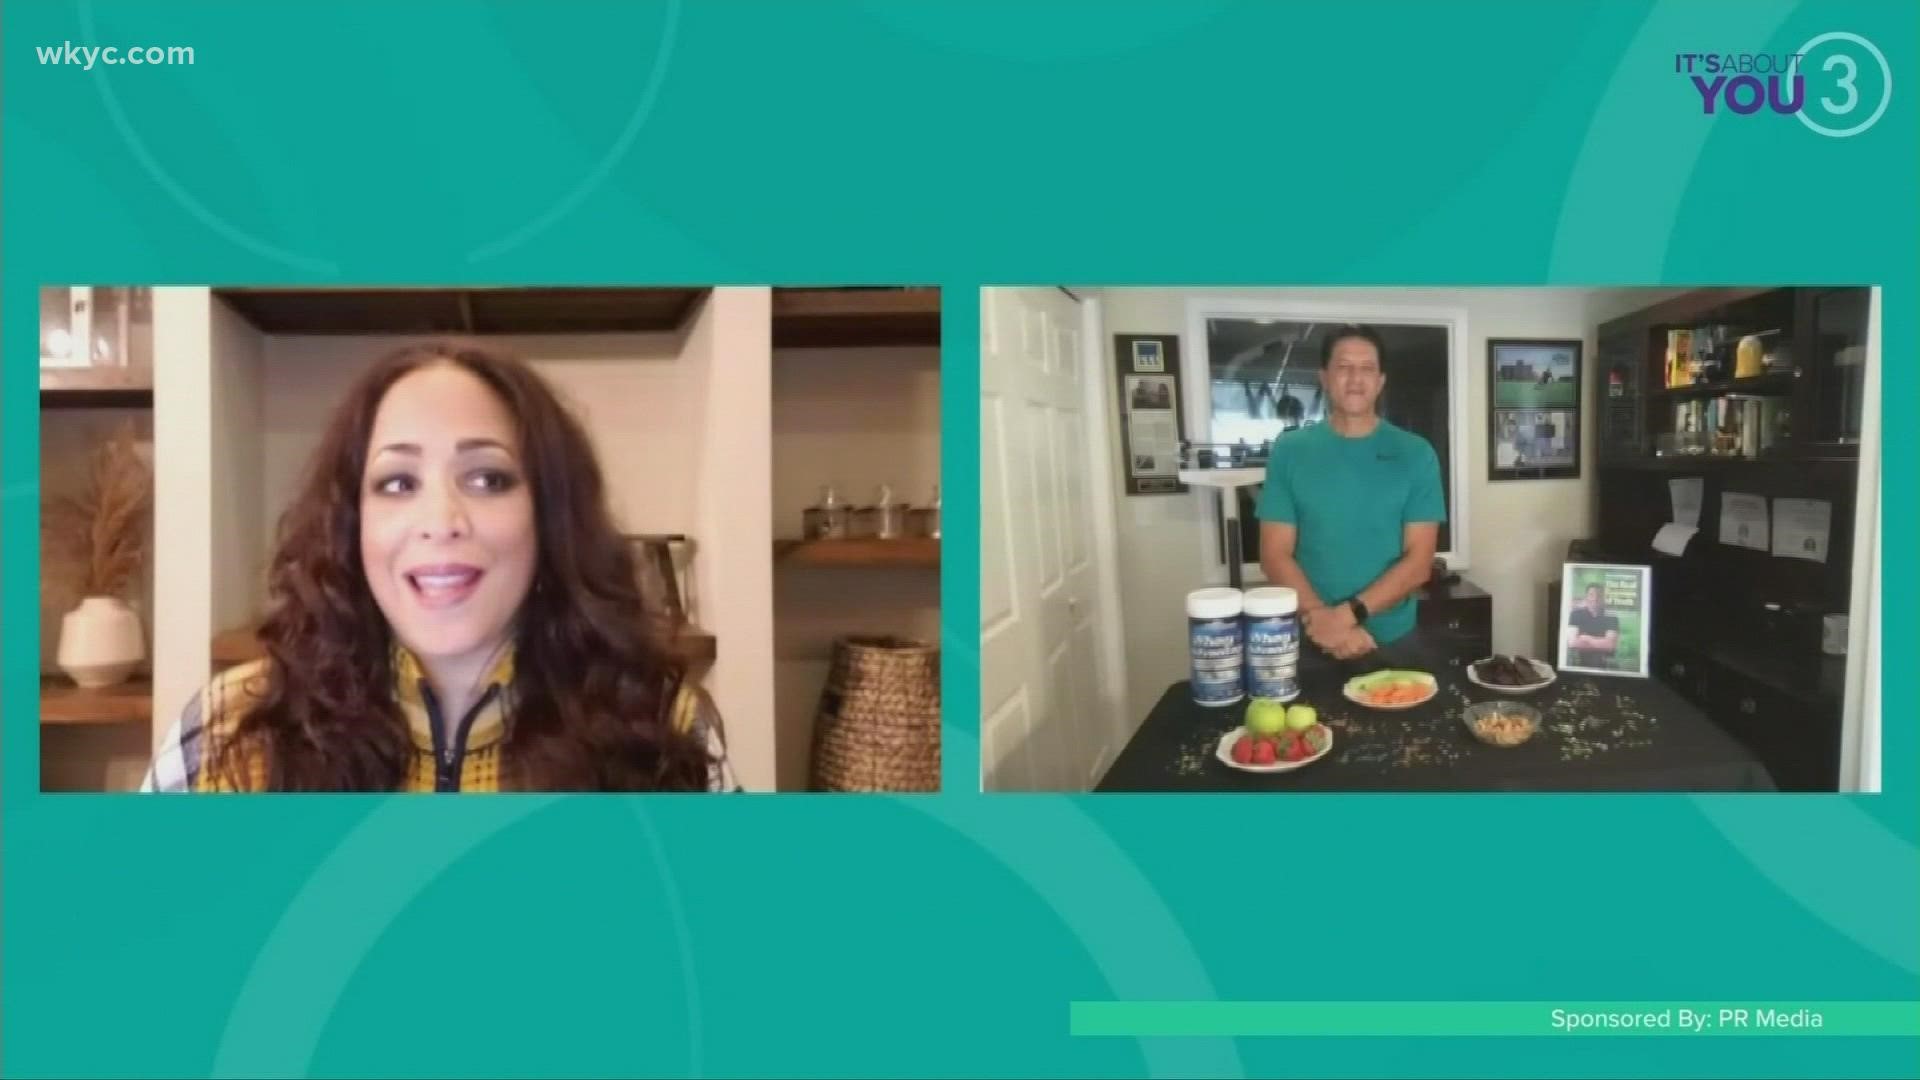 LeeAnn is talking with Eraldo Maglara about important tips in the kitchen to stay healthy and feel better!